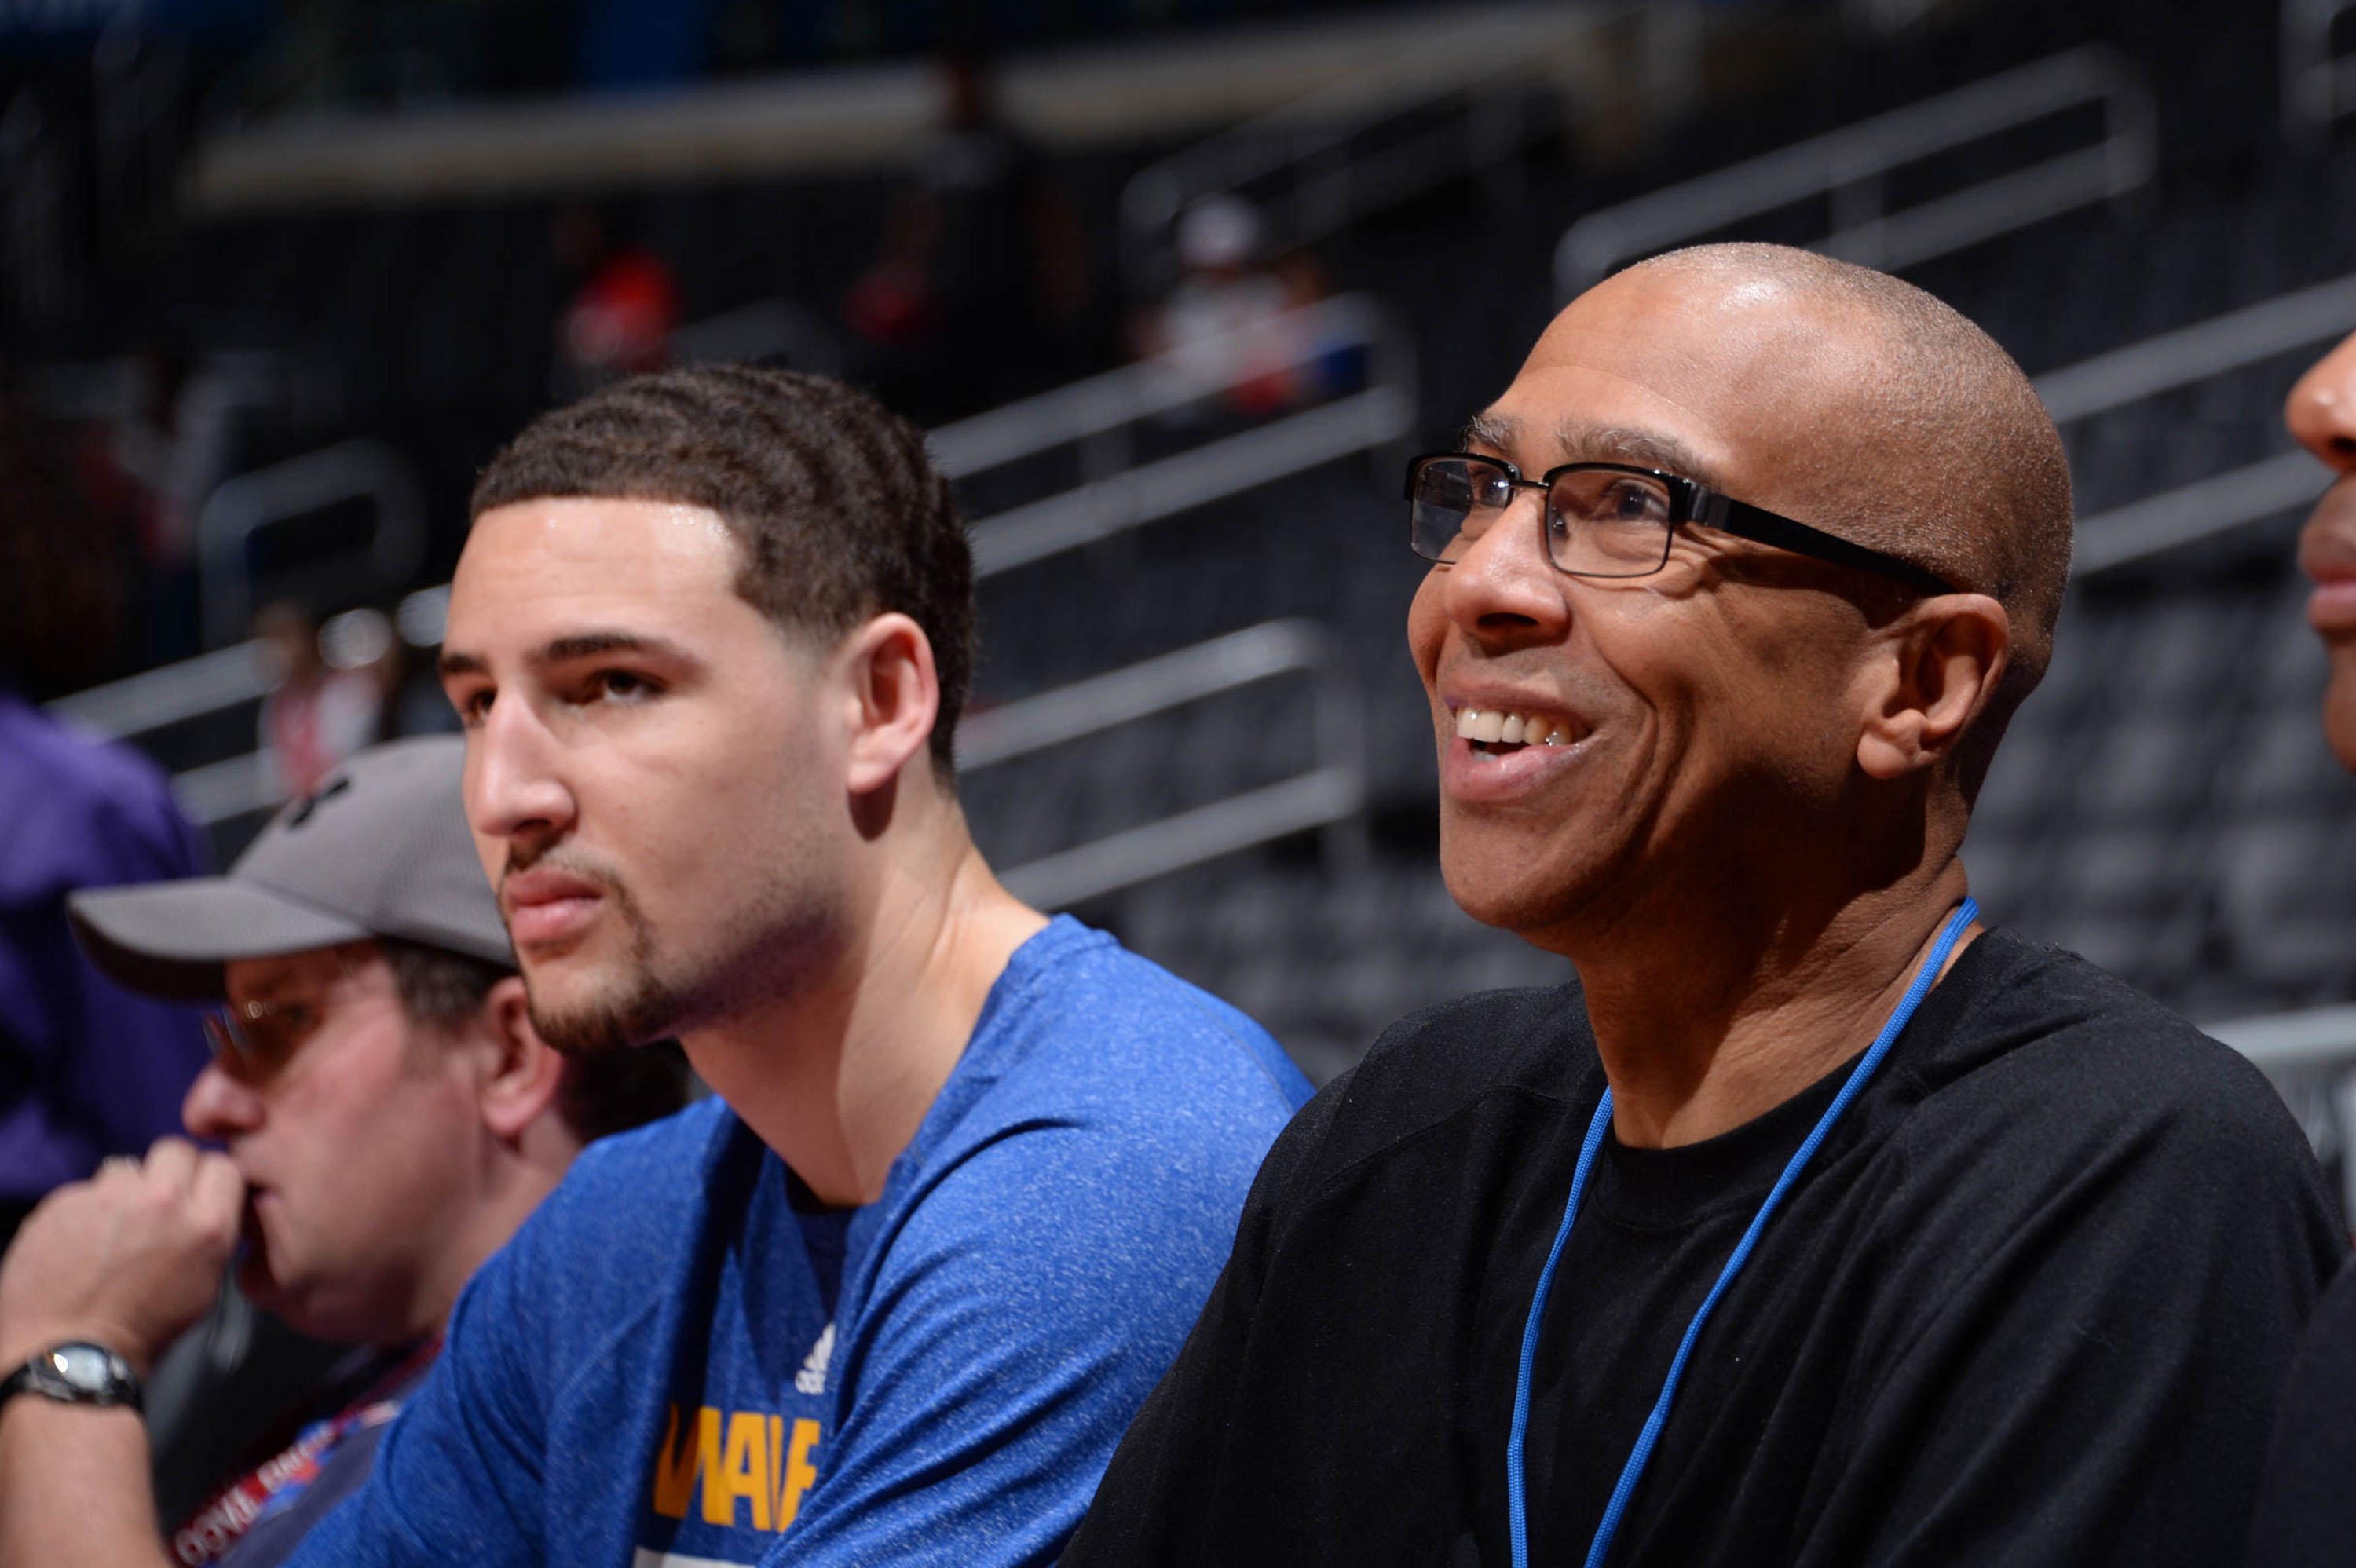 Klay Thompson #11 of the Golden State Warriors and his father Mychal Thompson before a game against the Los Angeles Clippers in 2014 in Los Angeles. | Source: Getty Images